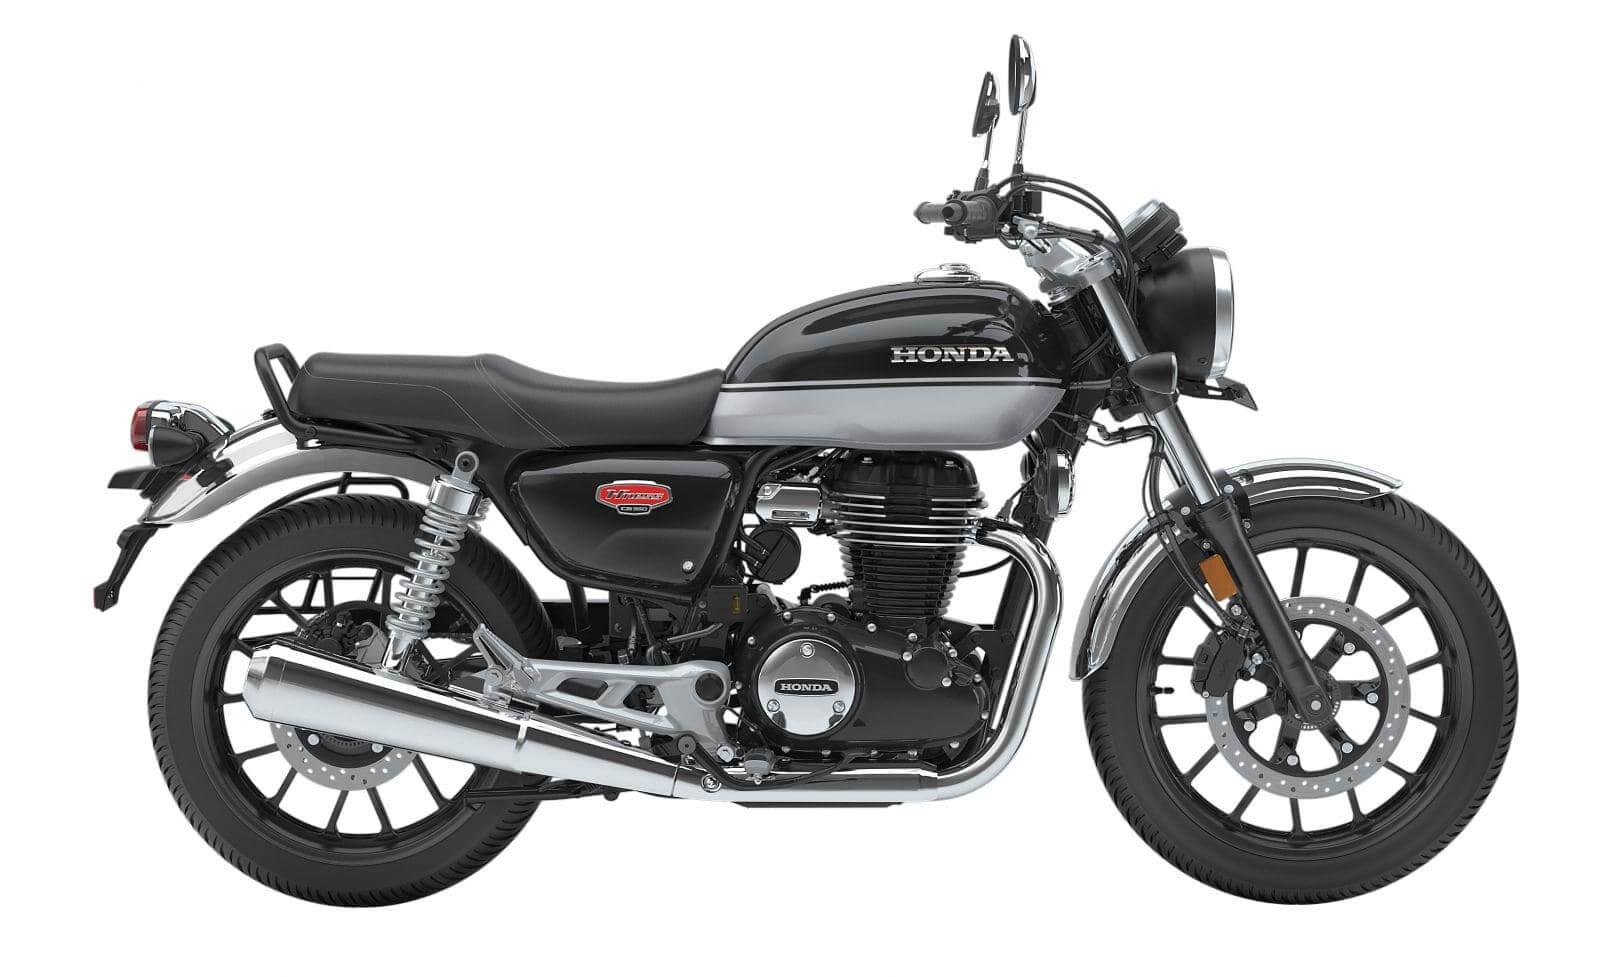 Honda Hness CB350 on rent in Bangalore